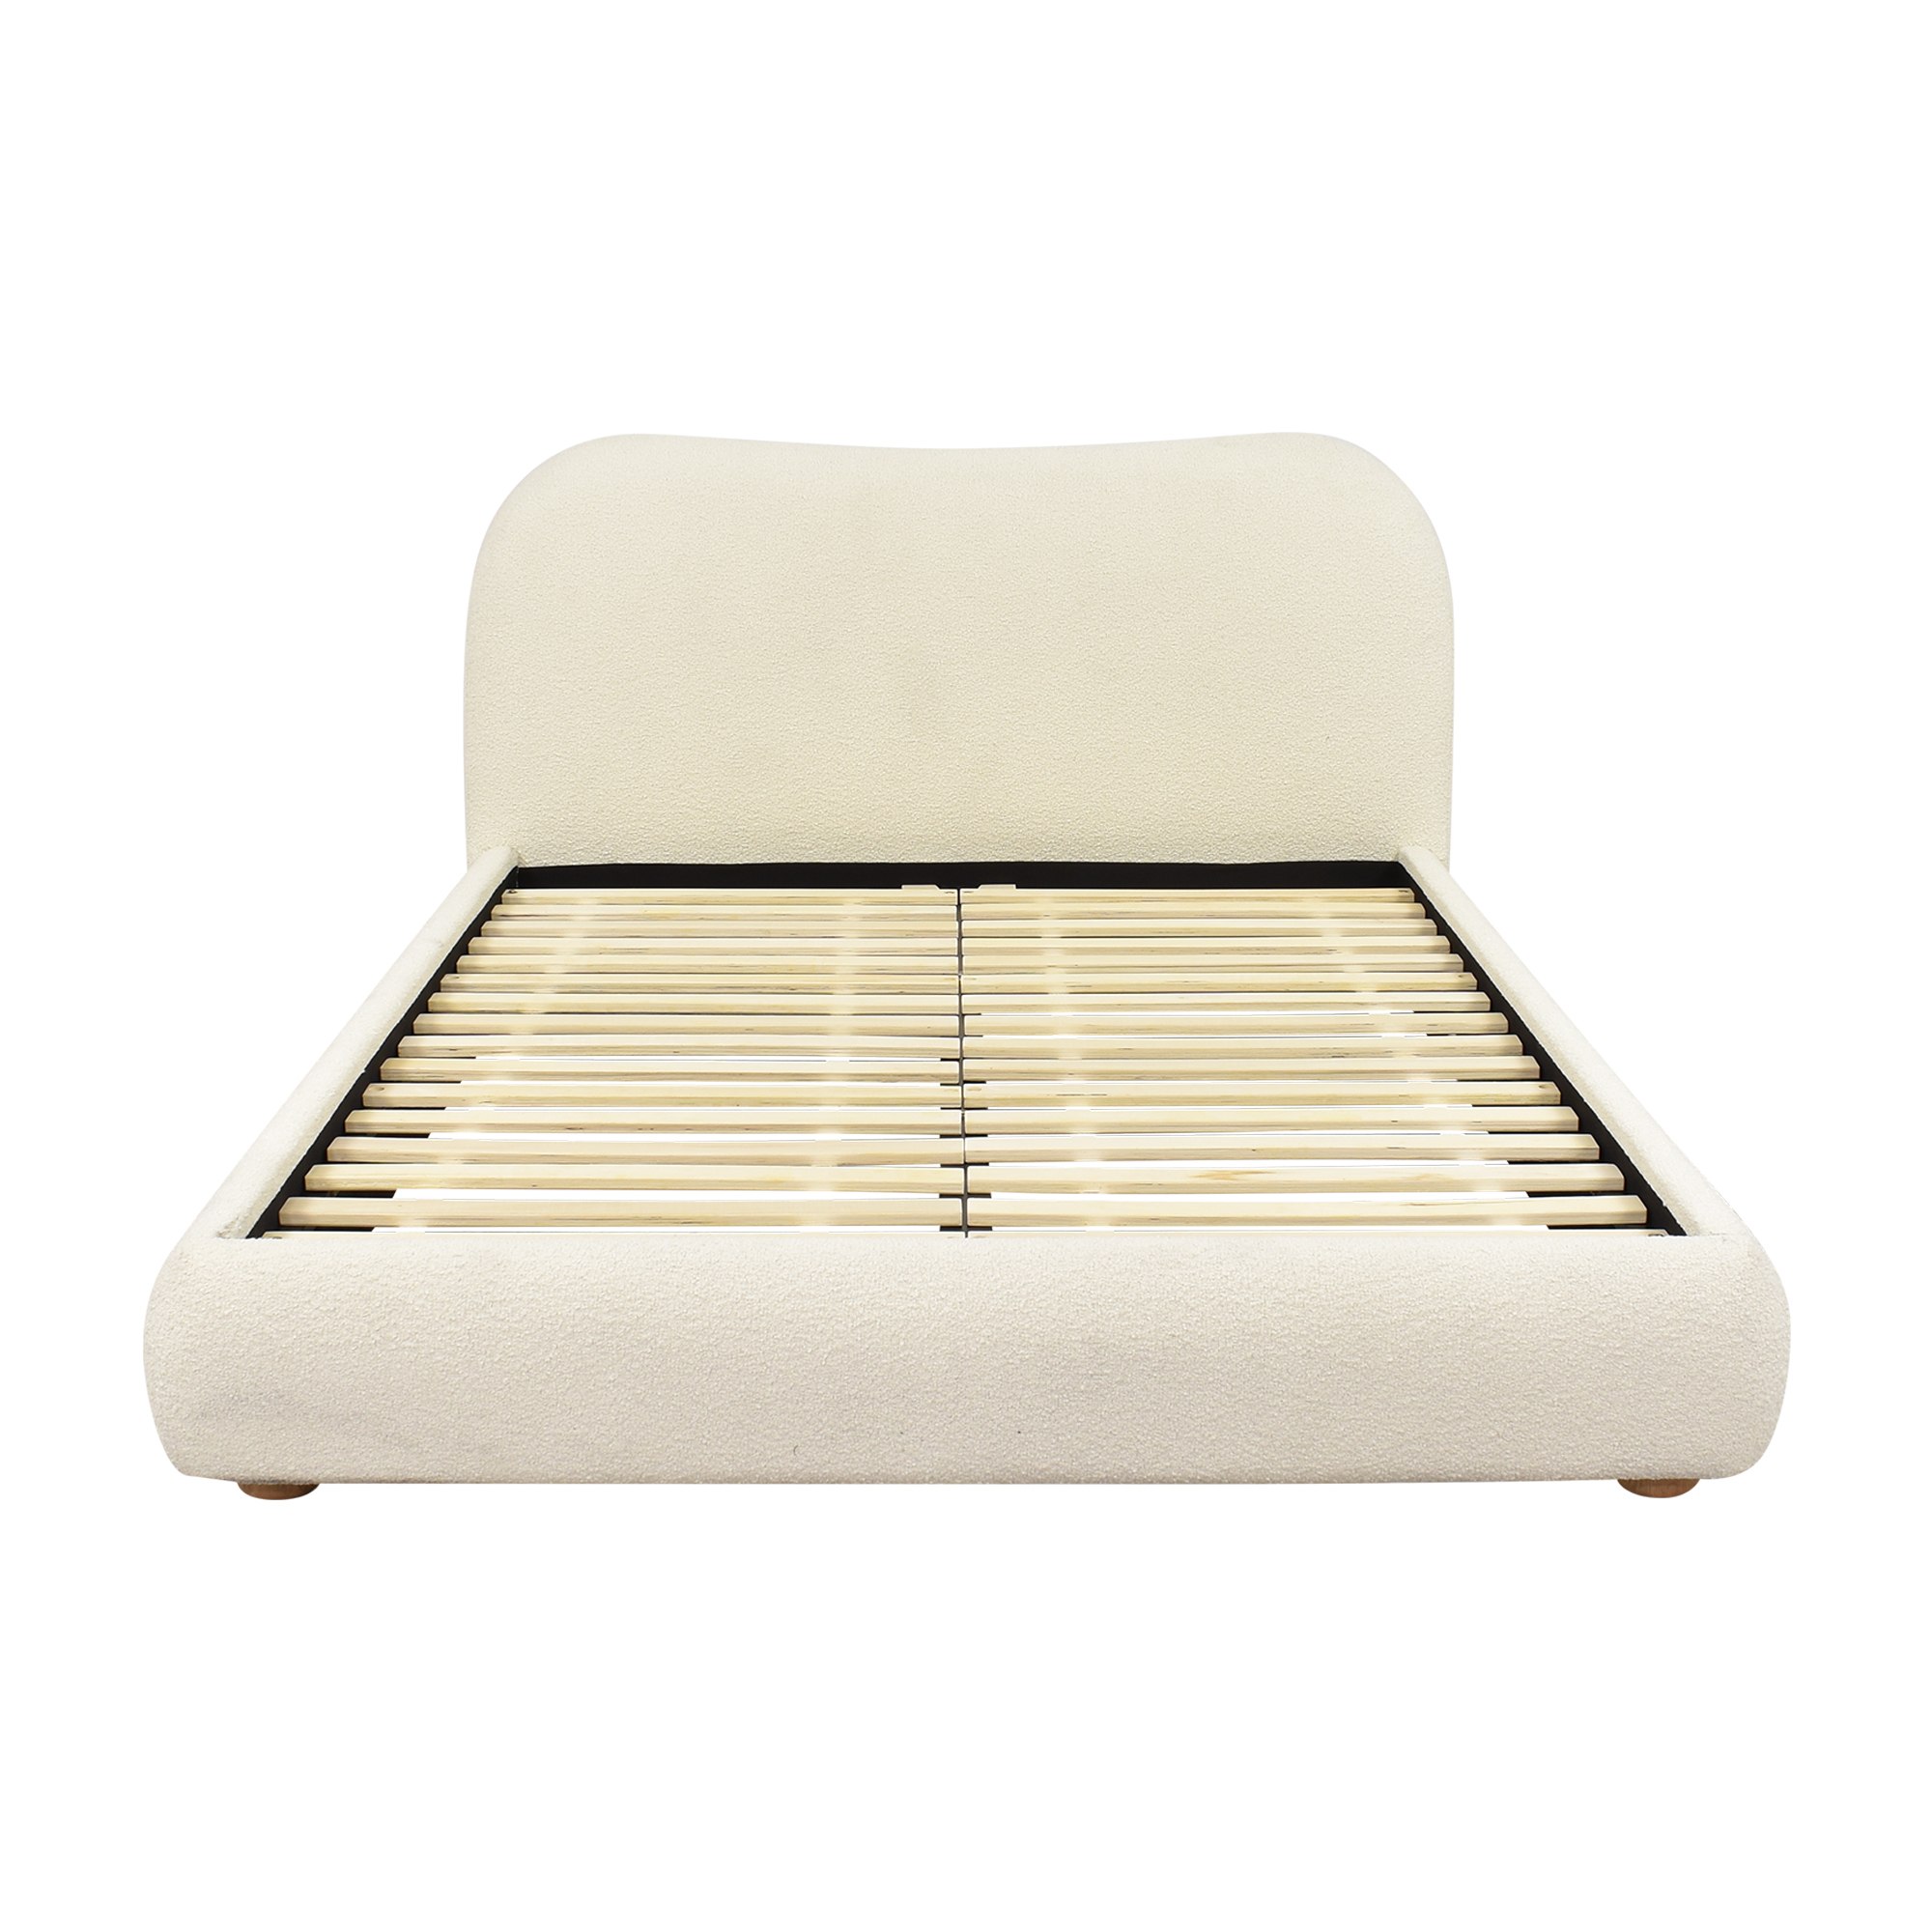 32% OFF - CB2 CB2 Diana Queen Bed / Beds